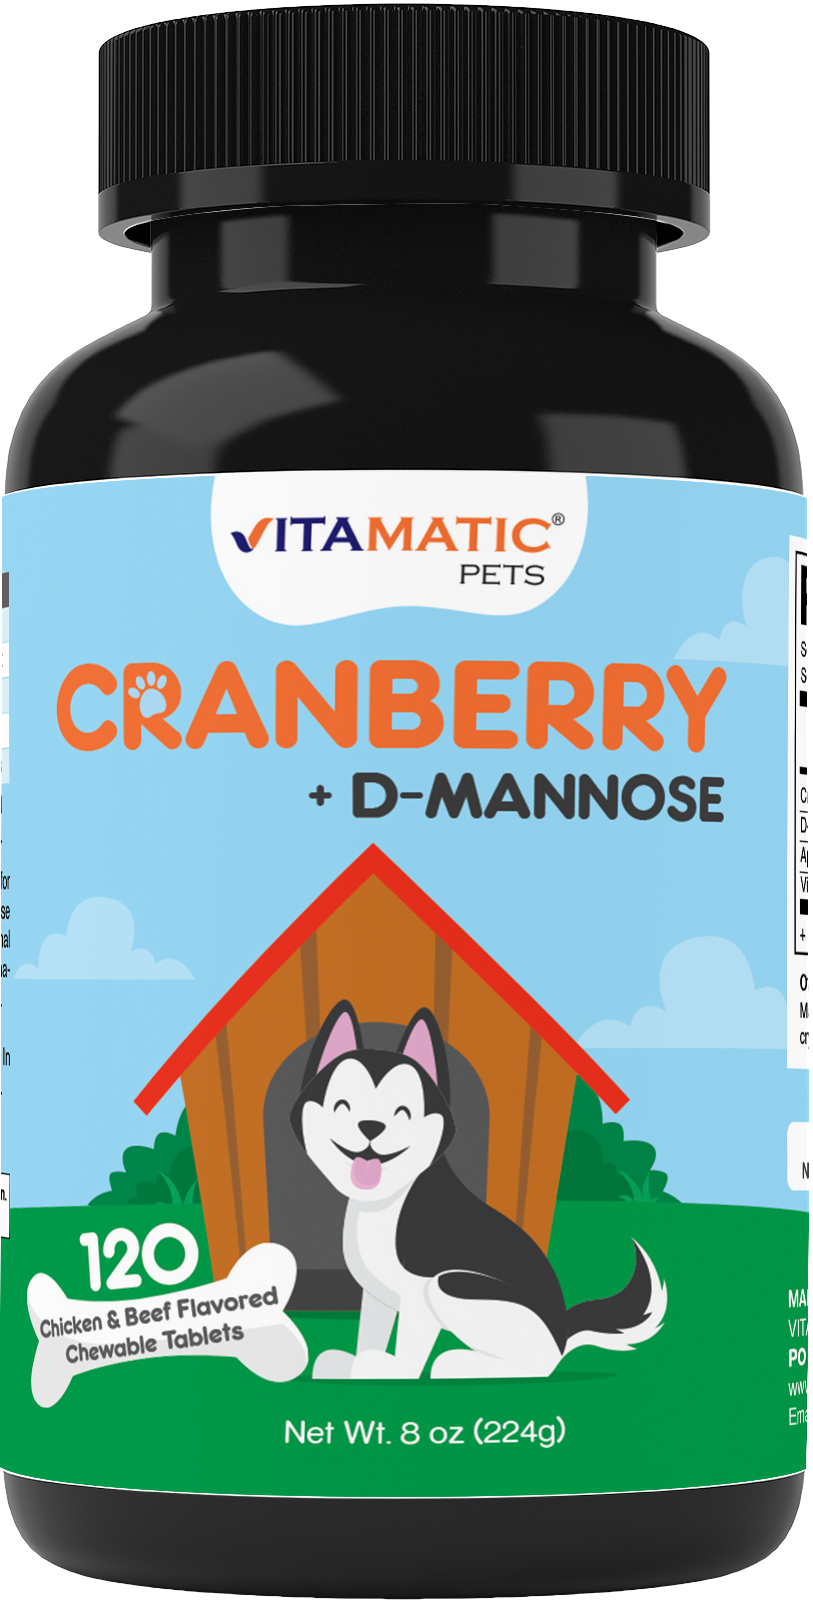 Cranberry for Dogs 120 Chewable Tablets